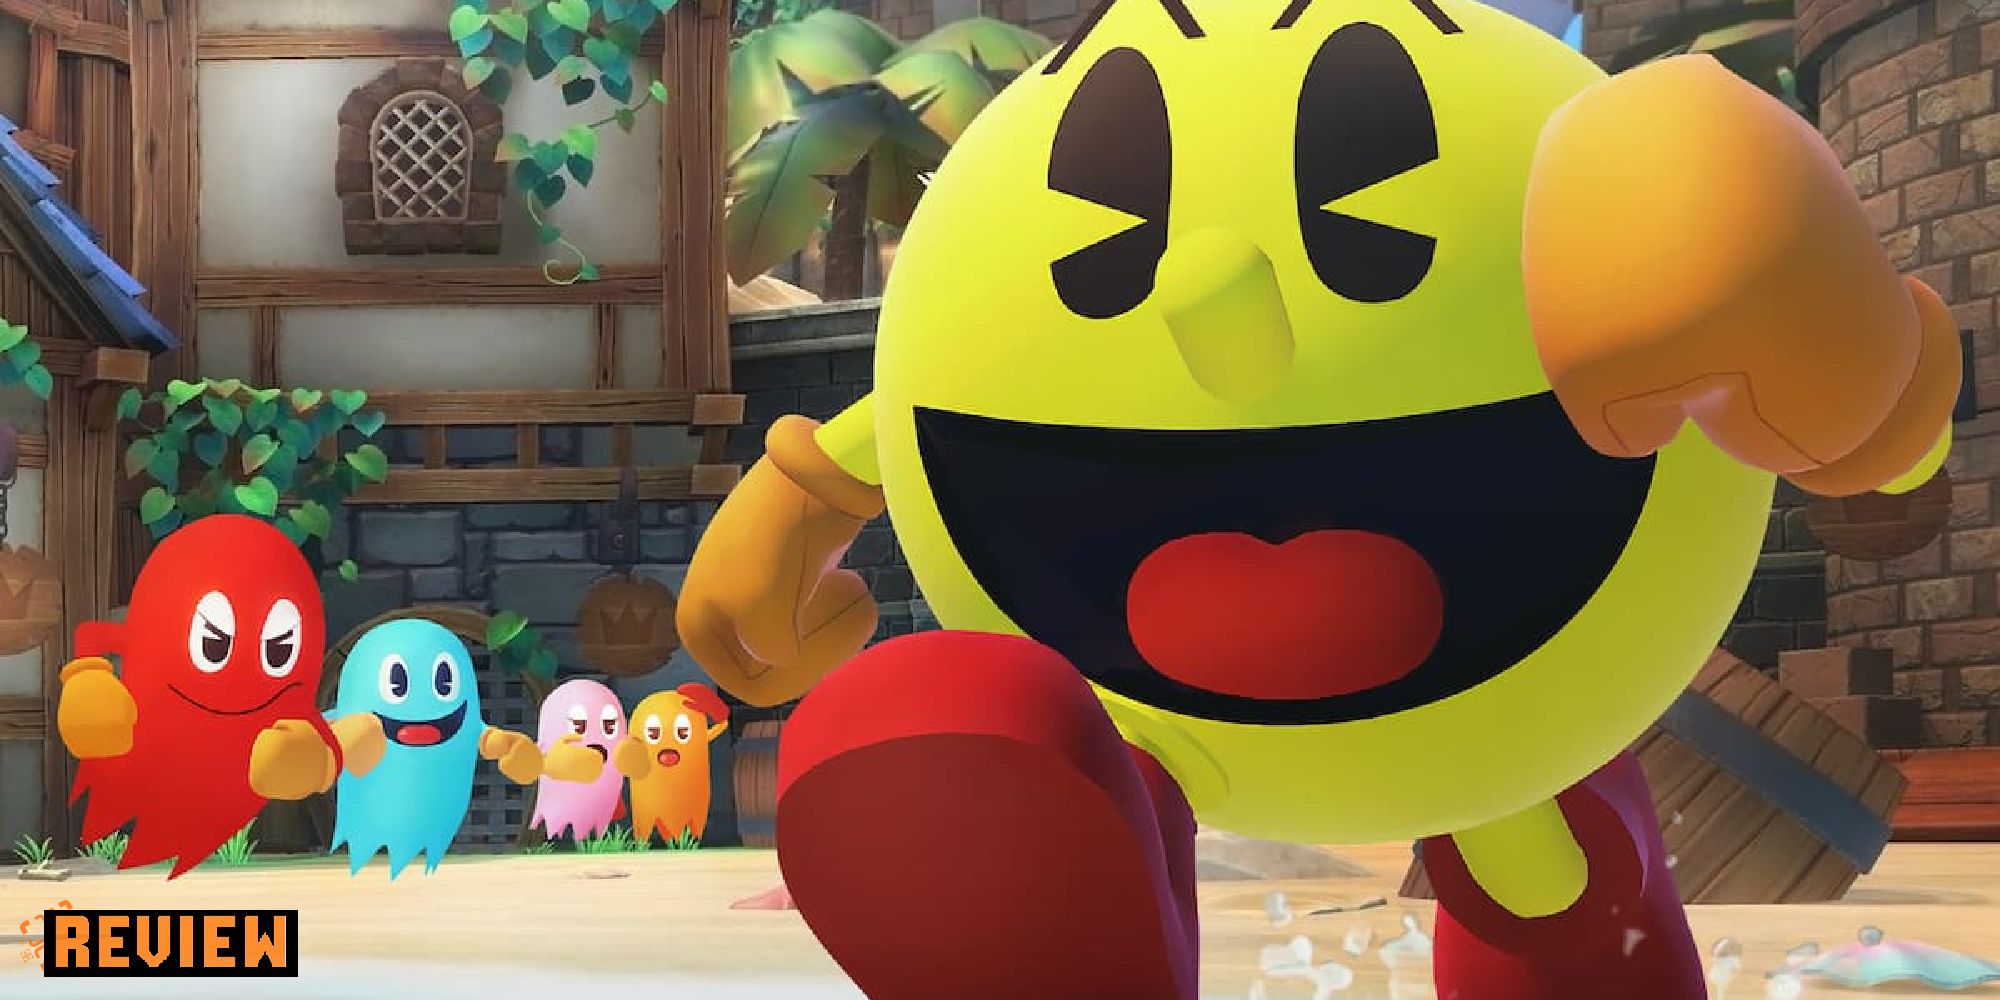 Pac-Man Review